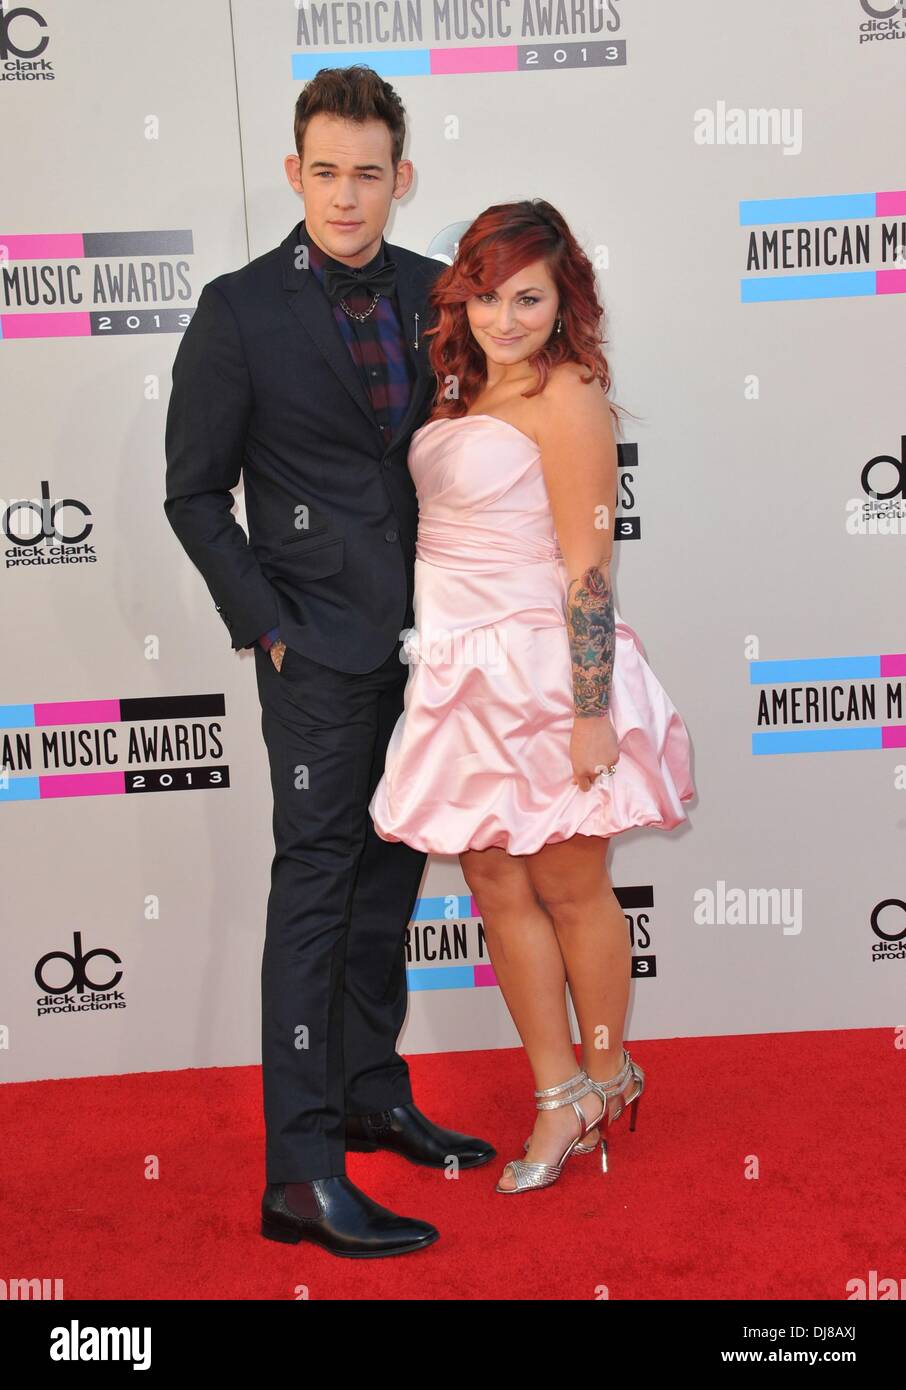 James Durbin, Heidi Durbin at arrivals for 2013 AMERICAN MUSIC AWARDS (AMAs) - Arrivals 2, Nokia Theatre L.A. Live, Los Angeles, CA November 24, 2013. Photo By: Dee Cercone/Everett Collection Stock Photo